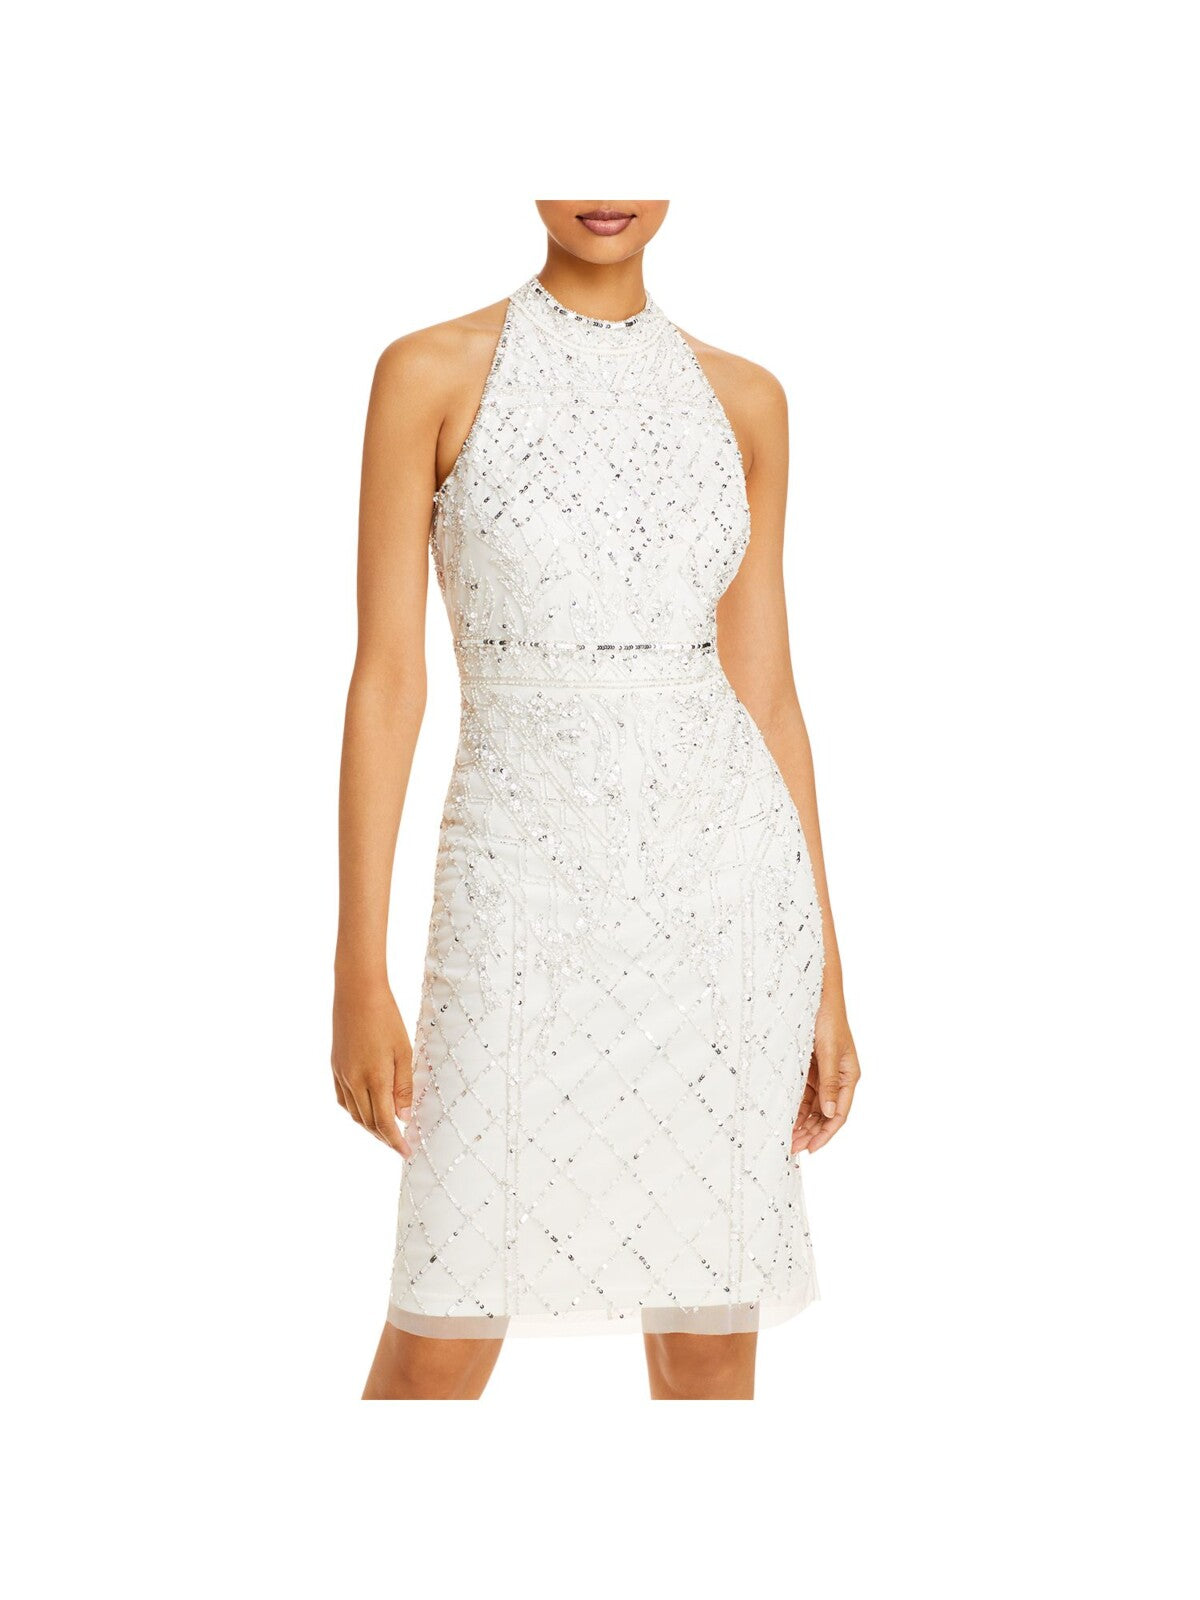 ADRIANNA PAPELL Womens White Beaded Sequined Zippered Lined Sleeveless Halter Above The Knee Formal Sheath Dress 0